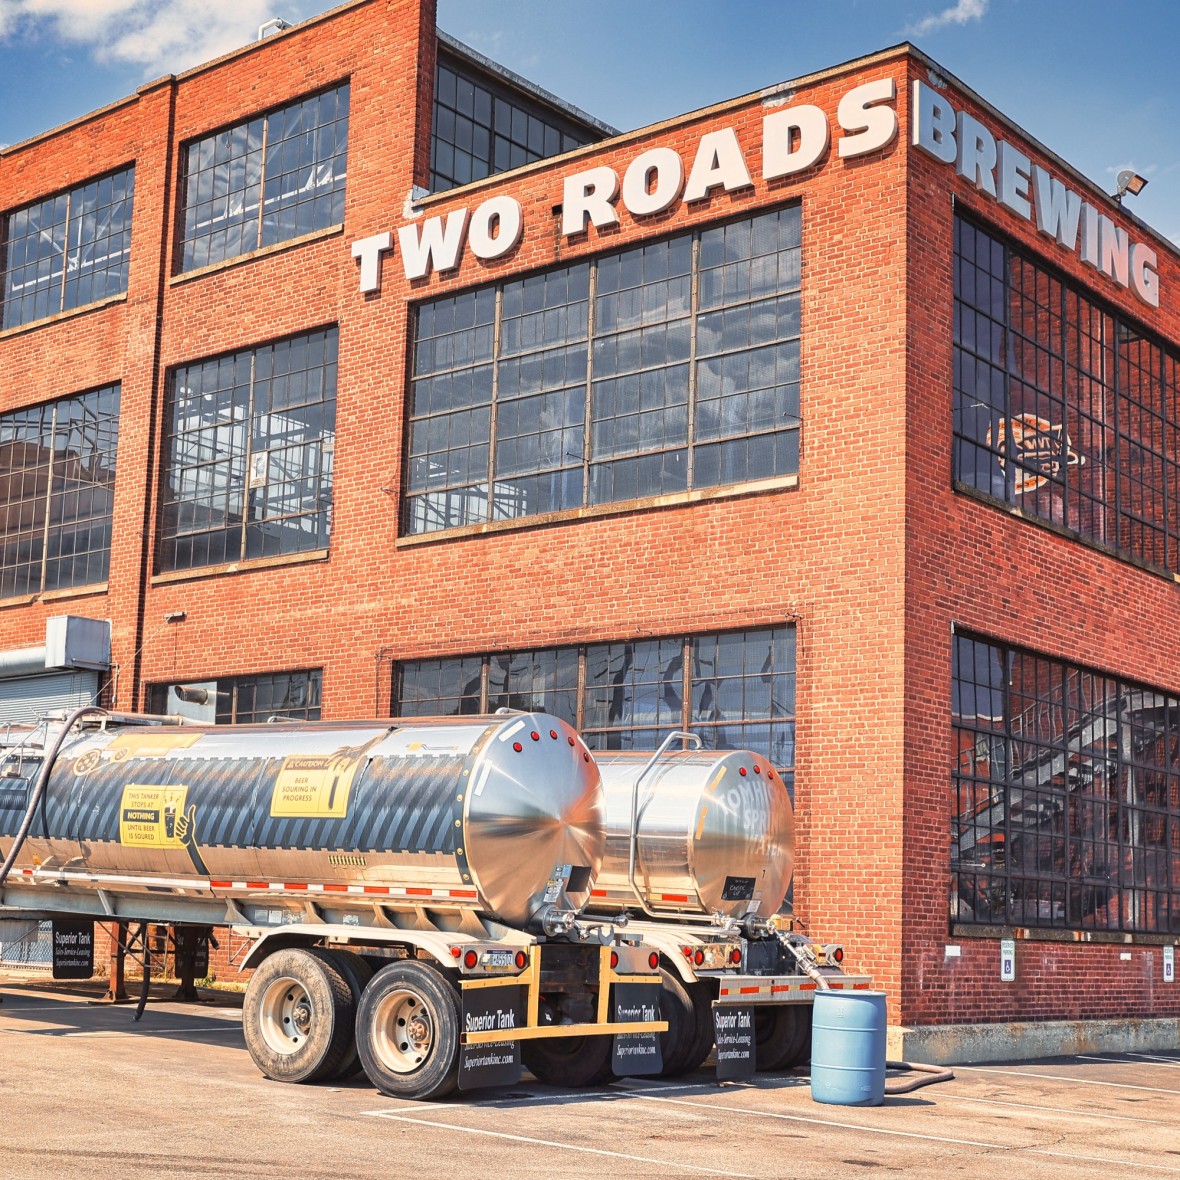 Exterior of Two Roads Brewing in Stratford